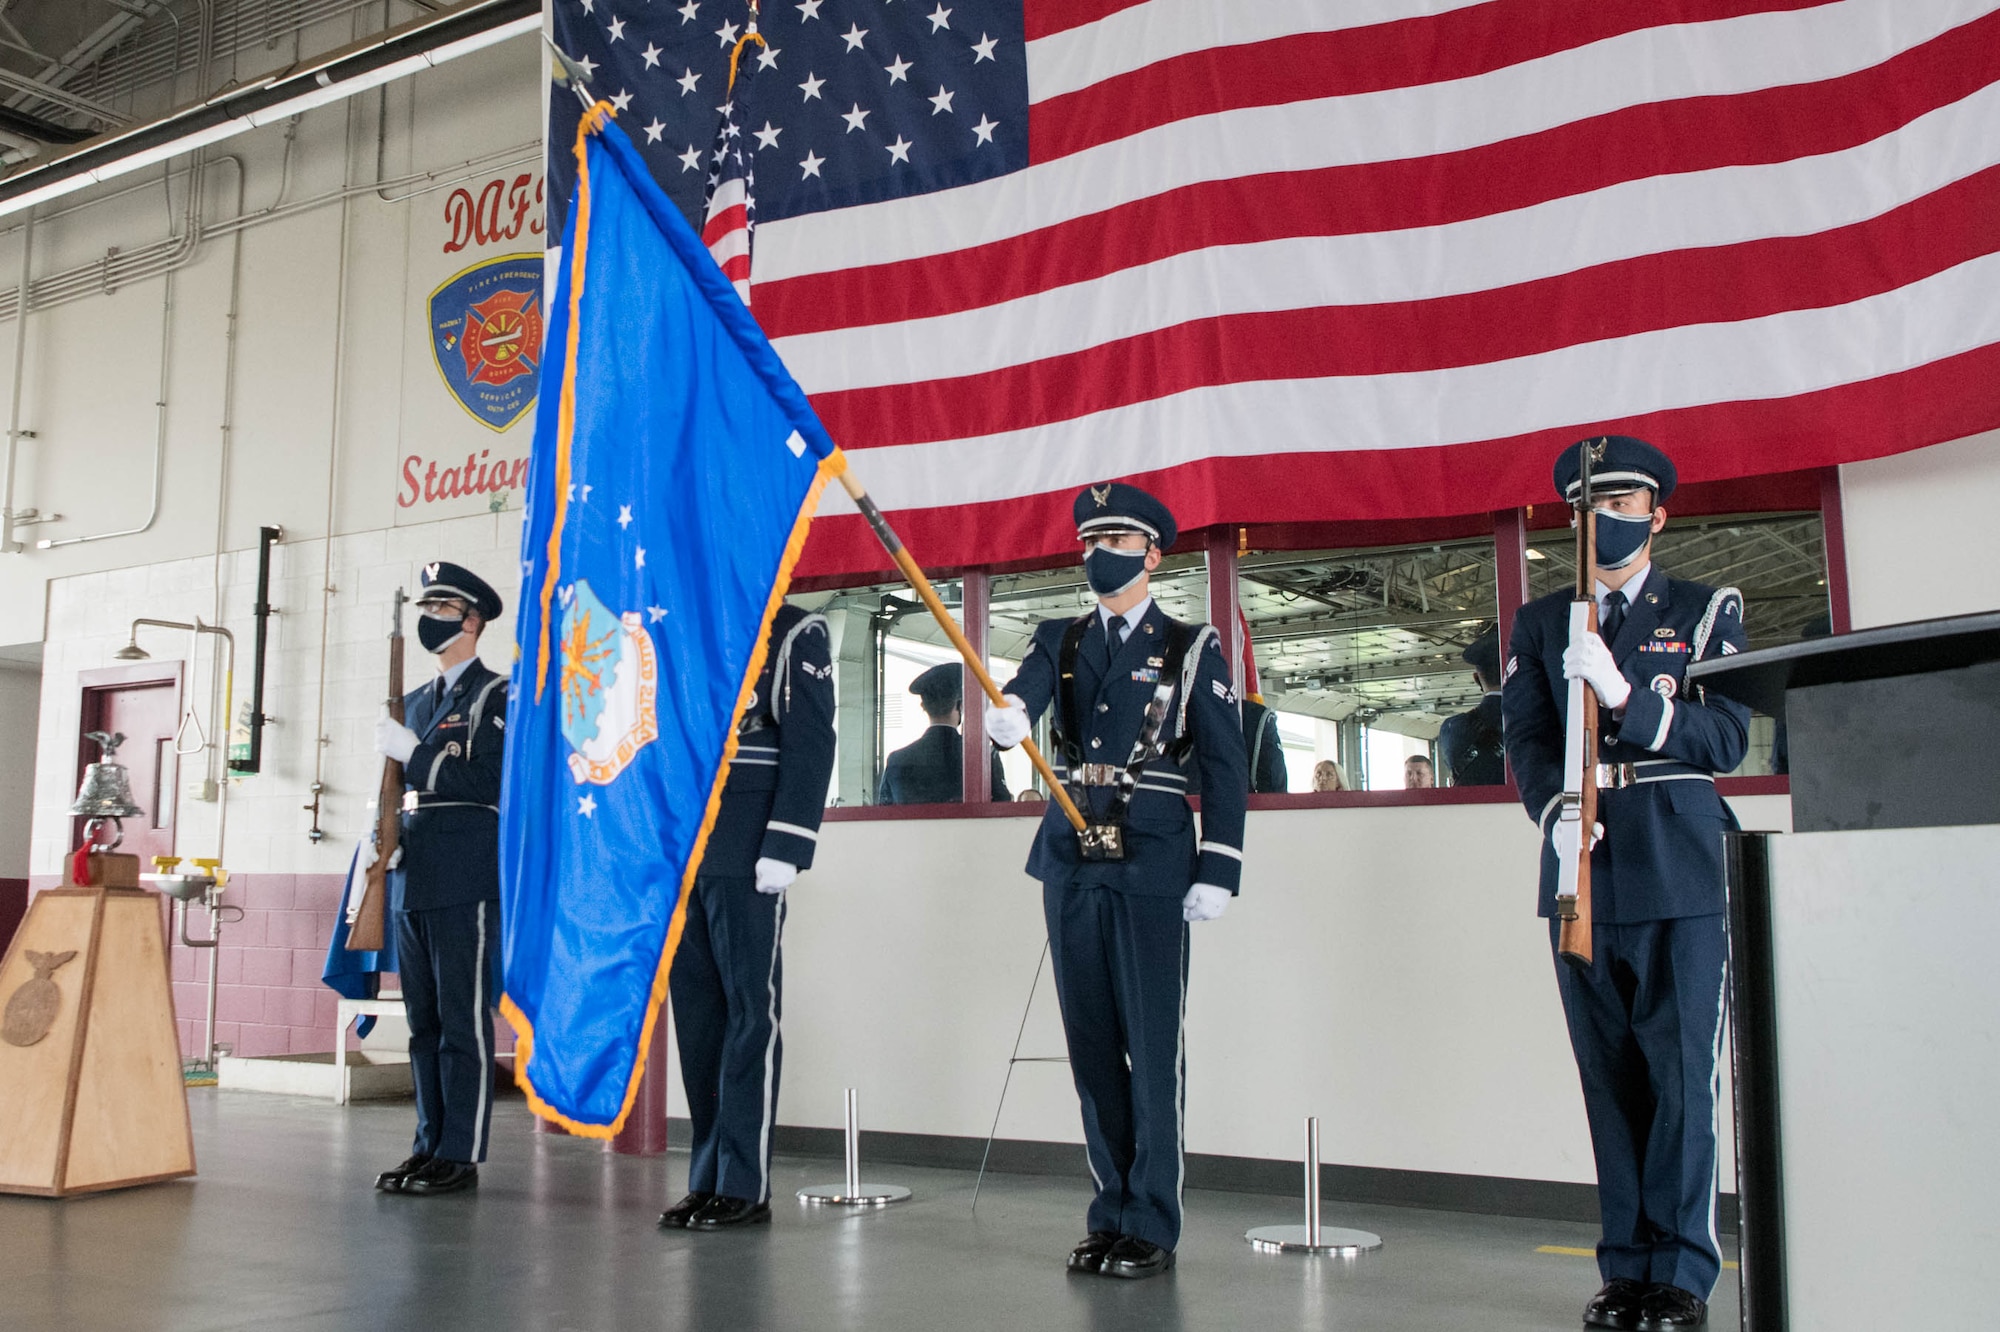 Members of the Dover Air Force Base Honor Guard present the colors during the 19th Anniversary 9/11 memorial eventSept. 11, 2020, at Dover AFB, Delaware. The memorial event honored the civilian casualties of the terrorist attacks, as well as the police officers, firefighters and first responders who lost their lives attempting to save them. (U.S. Air Force photo by Mauricio Campino)